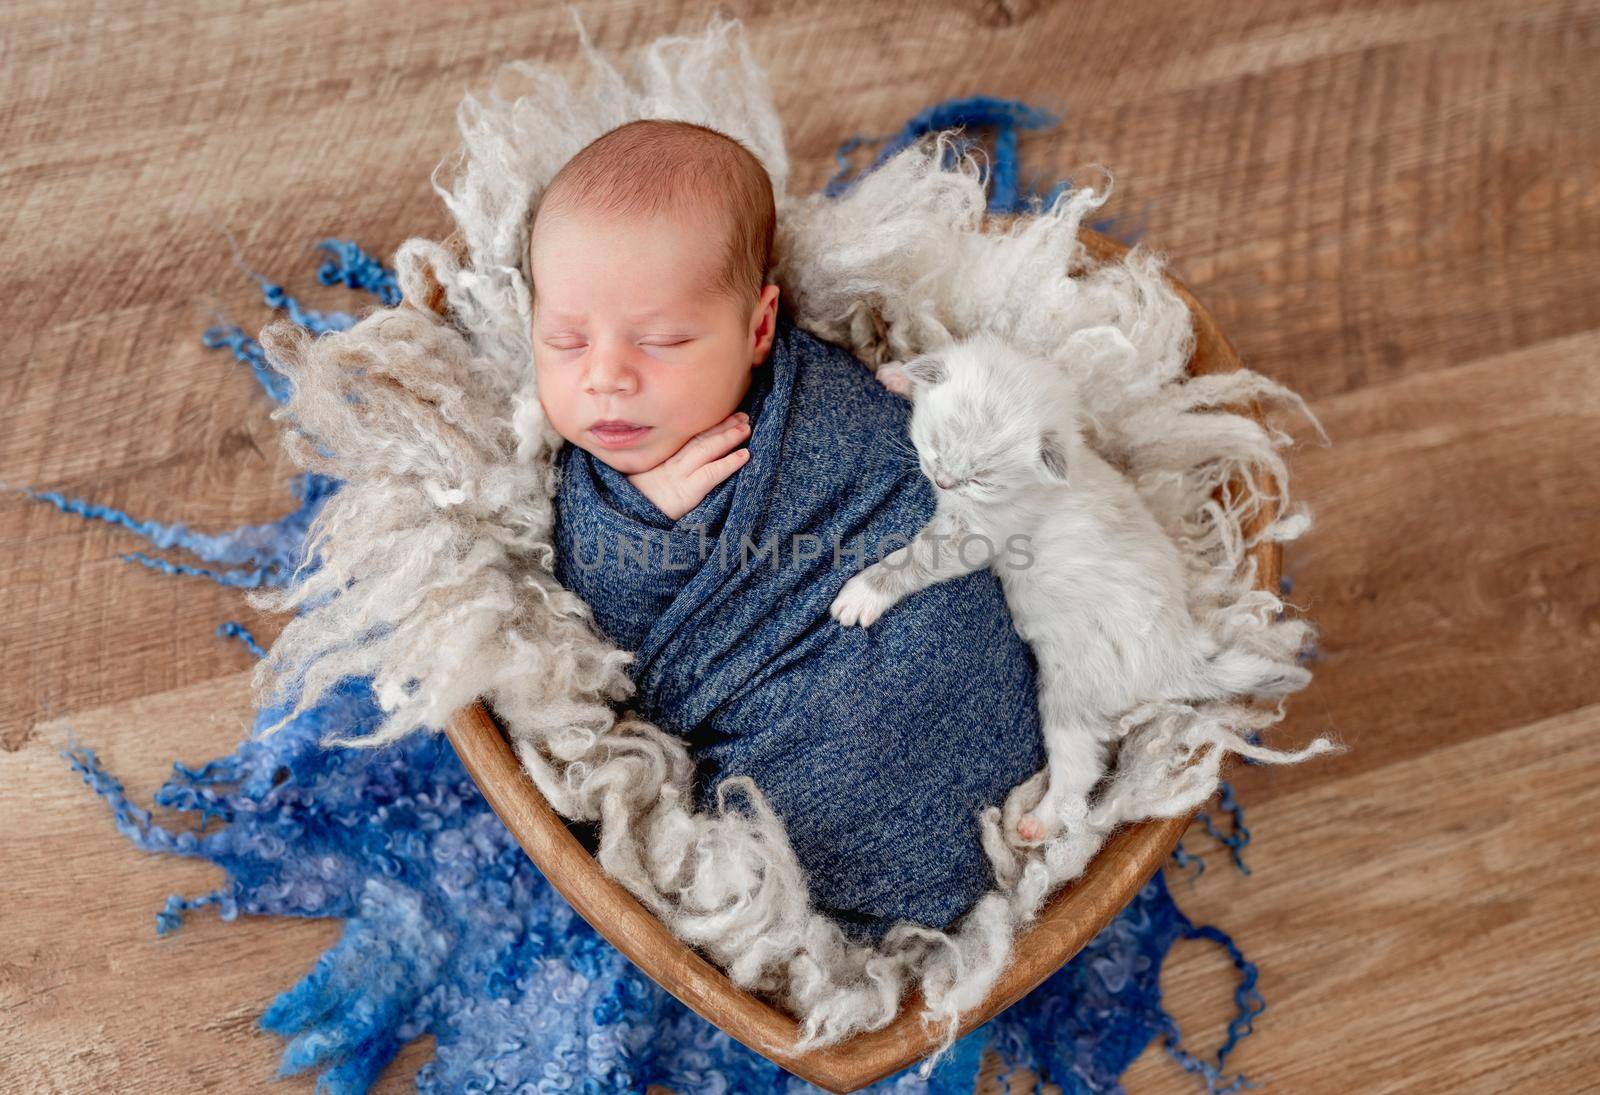 Adorable newborn baby boy swaddled in blue fabric sleeping with little fluffy white kitten hugging him. Cute infant kid napping with cat kity in wooden heart bed during studio photoshoot